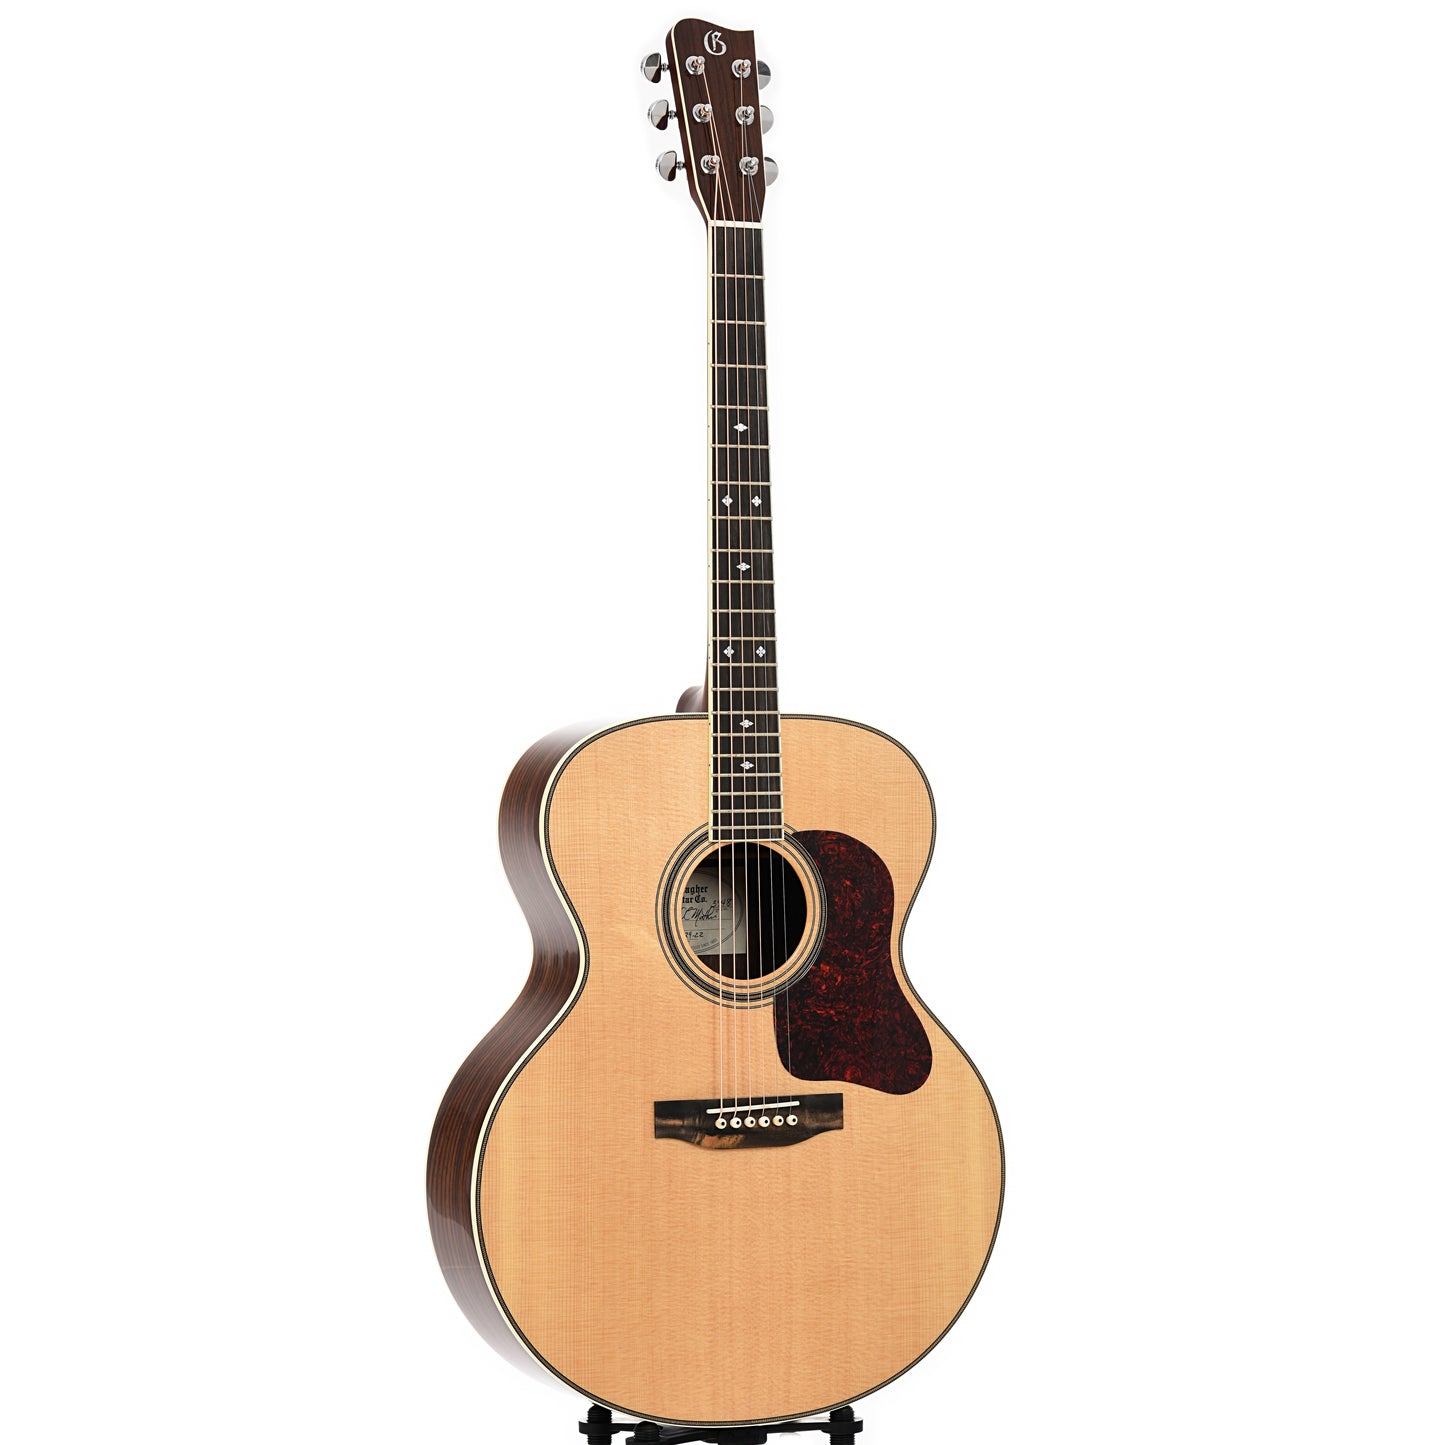 Full front and side of Gallagher Guitar Co. Jumbo 70 Acoustic